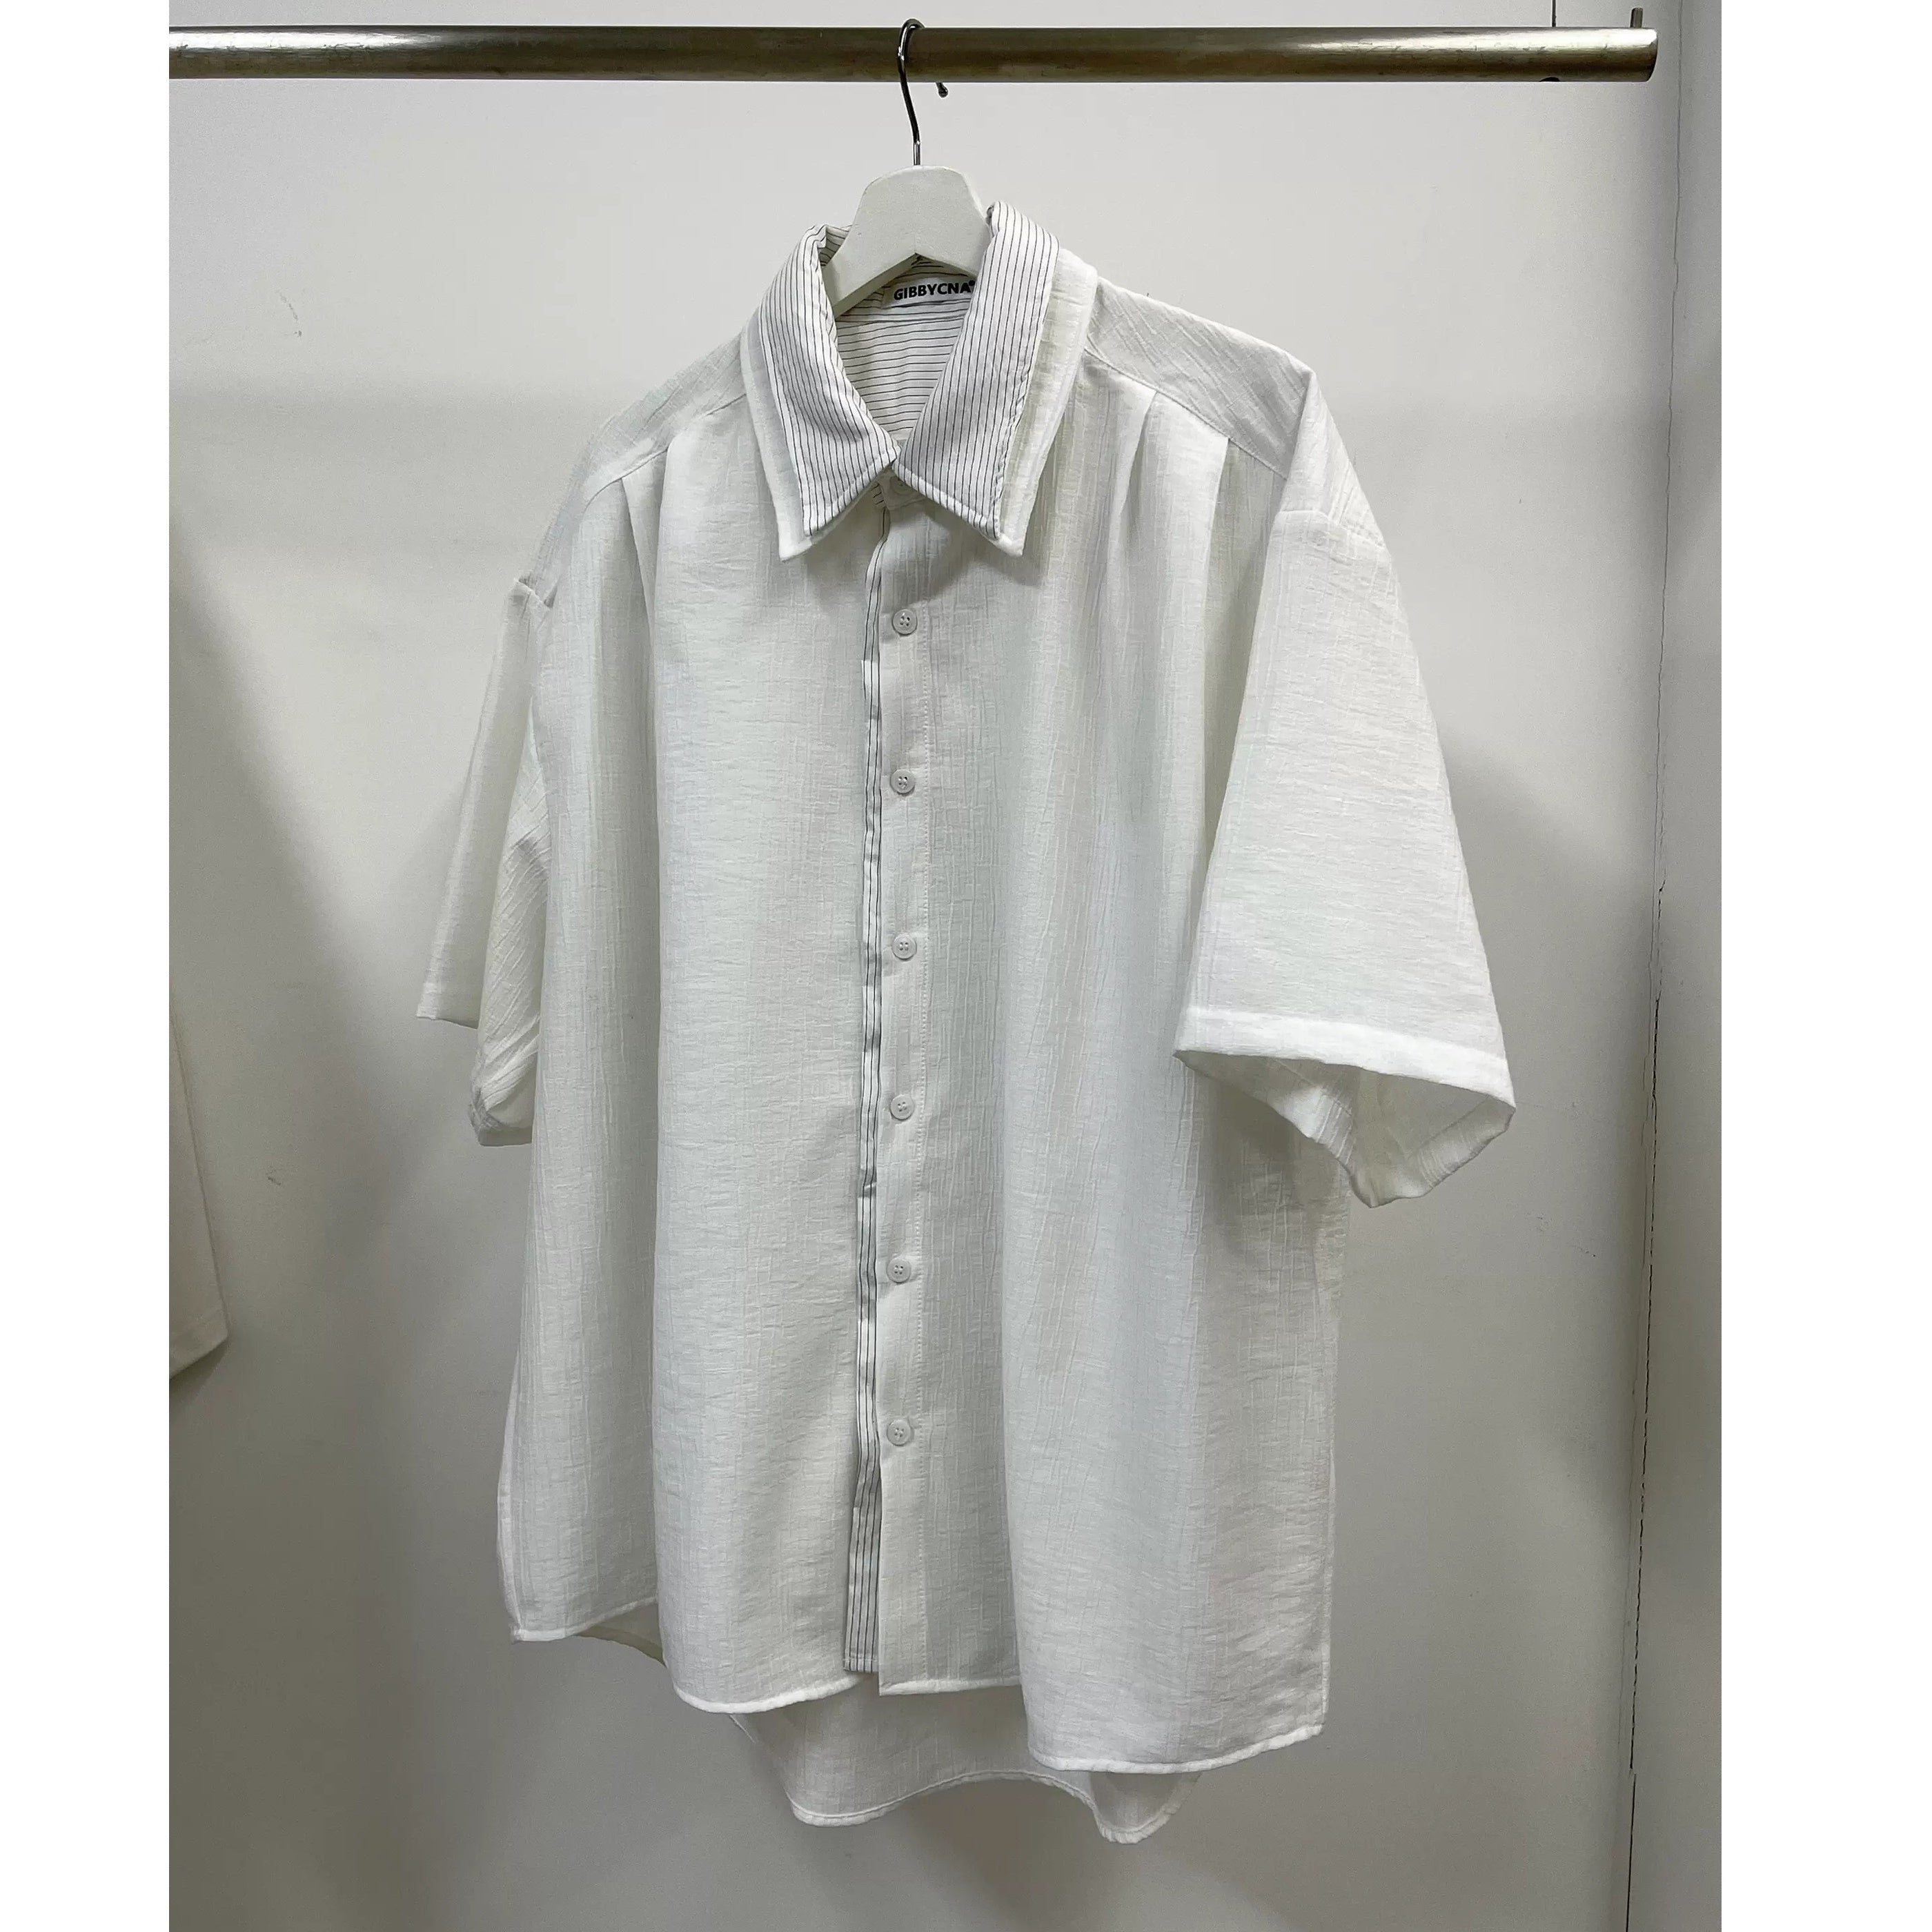 Double Collar Fake Two Short Sleeve Shirt GB7019